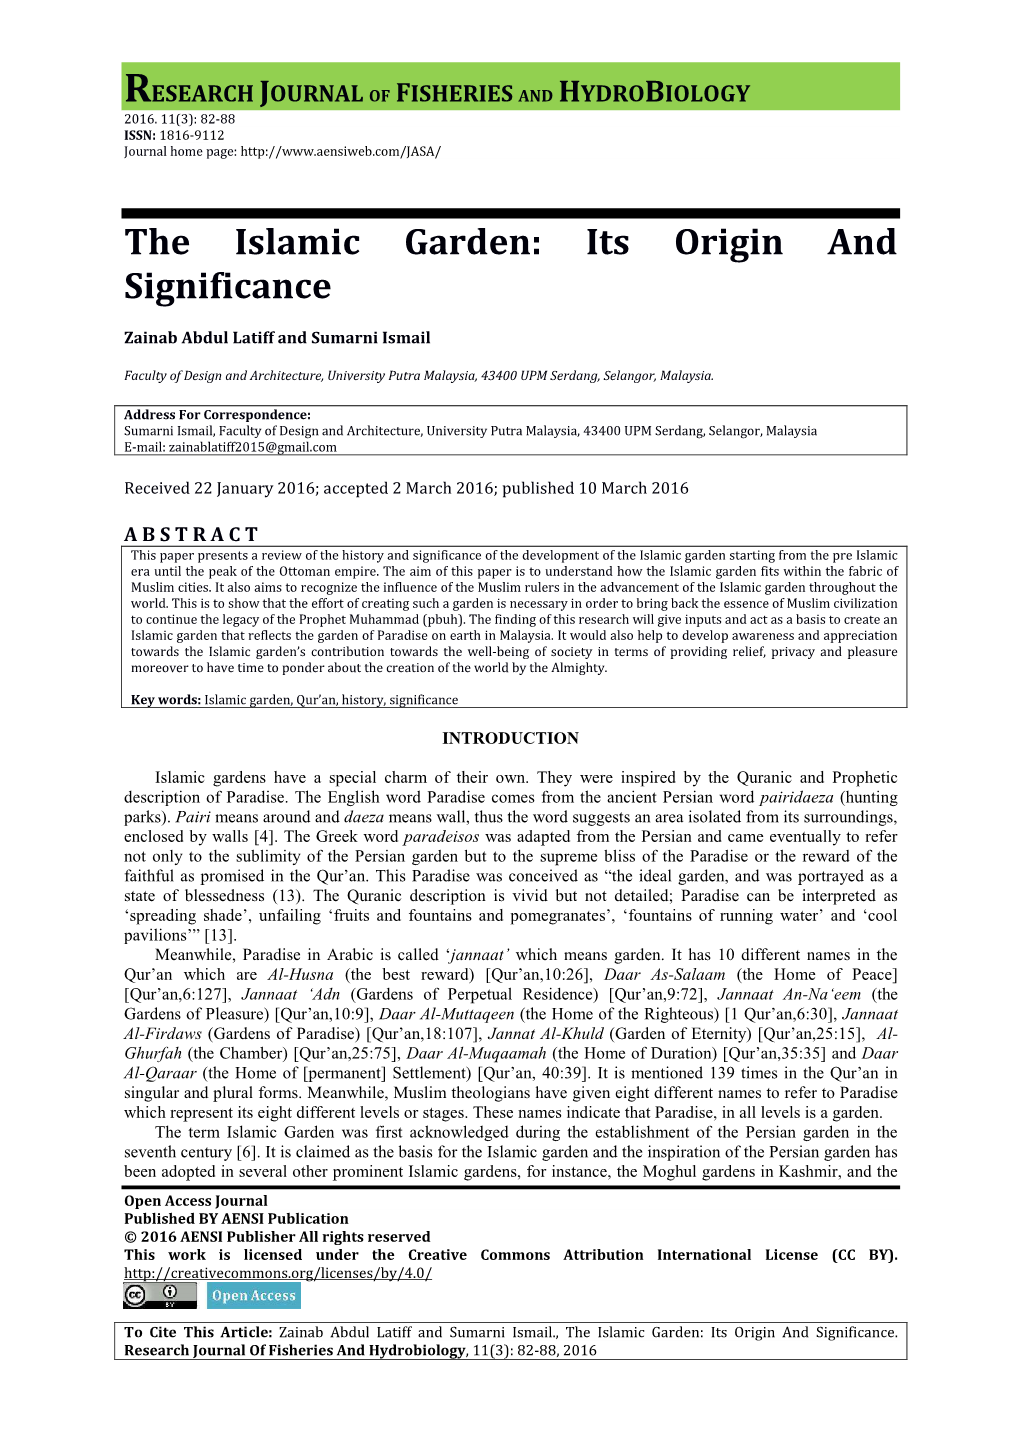 The Islamic Garden: Its Origin and Significance